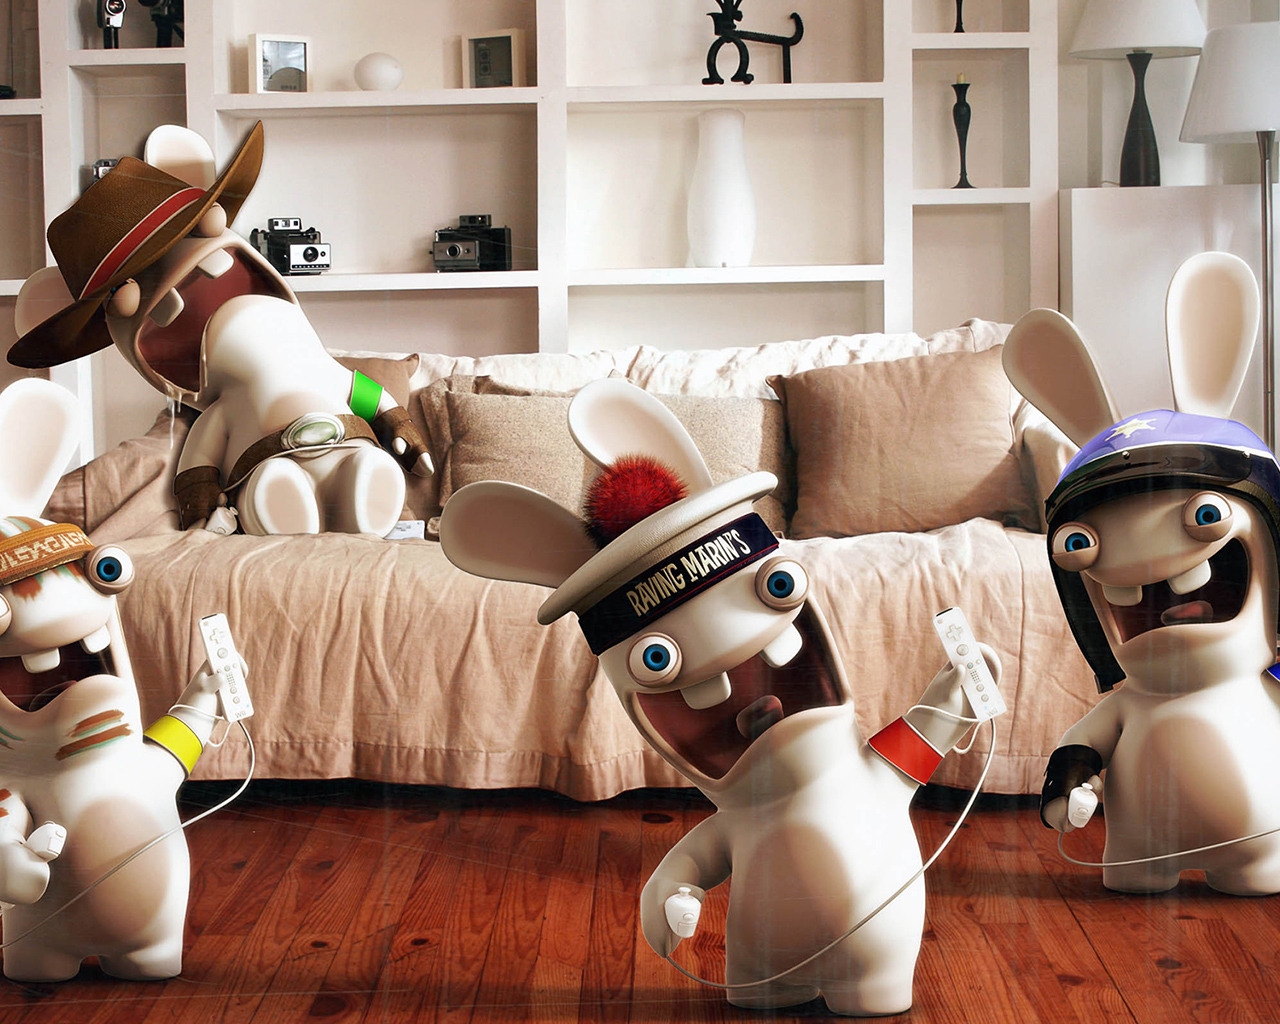 Rayman Raving Rabbids Playing Wii for 1280 x 1024 resolution